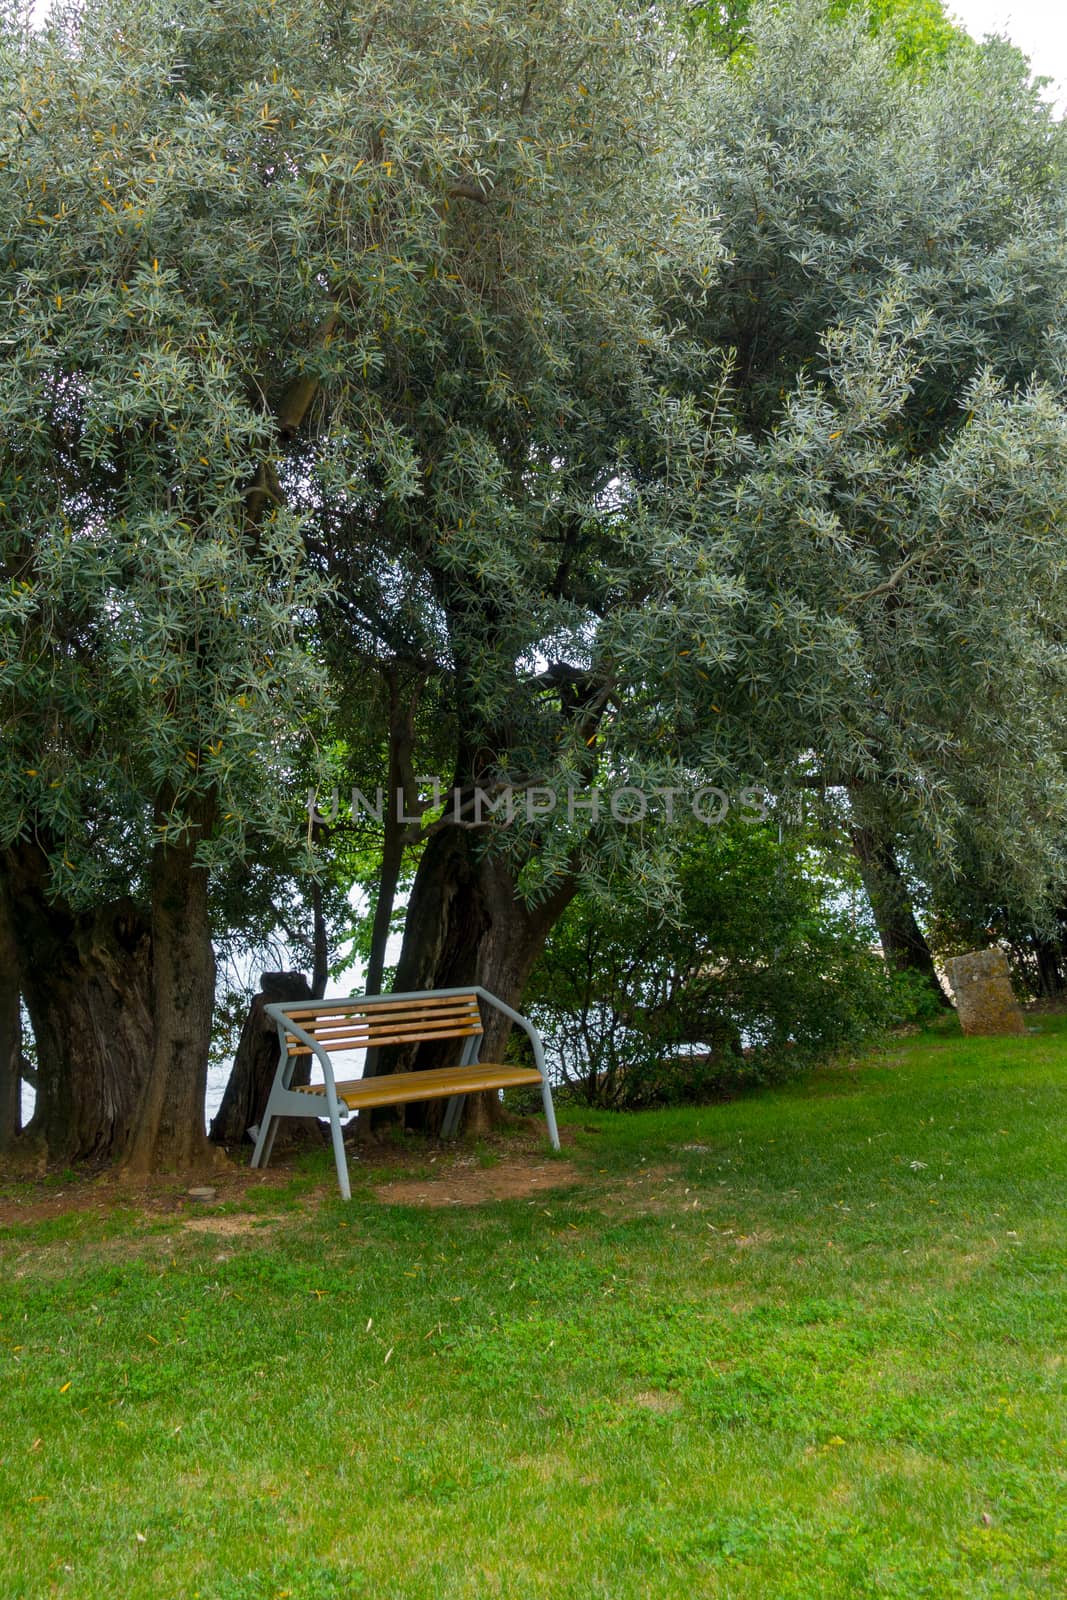 Olive trees as decoration in public park by asafaric